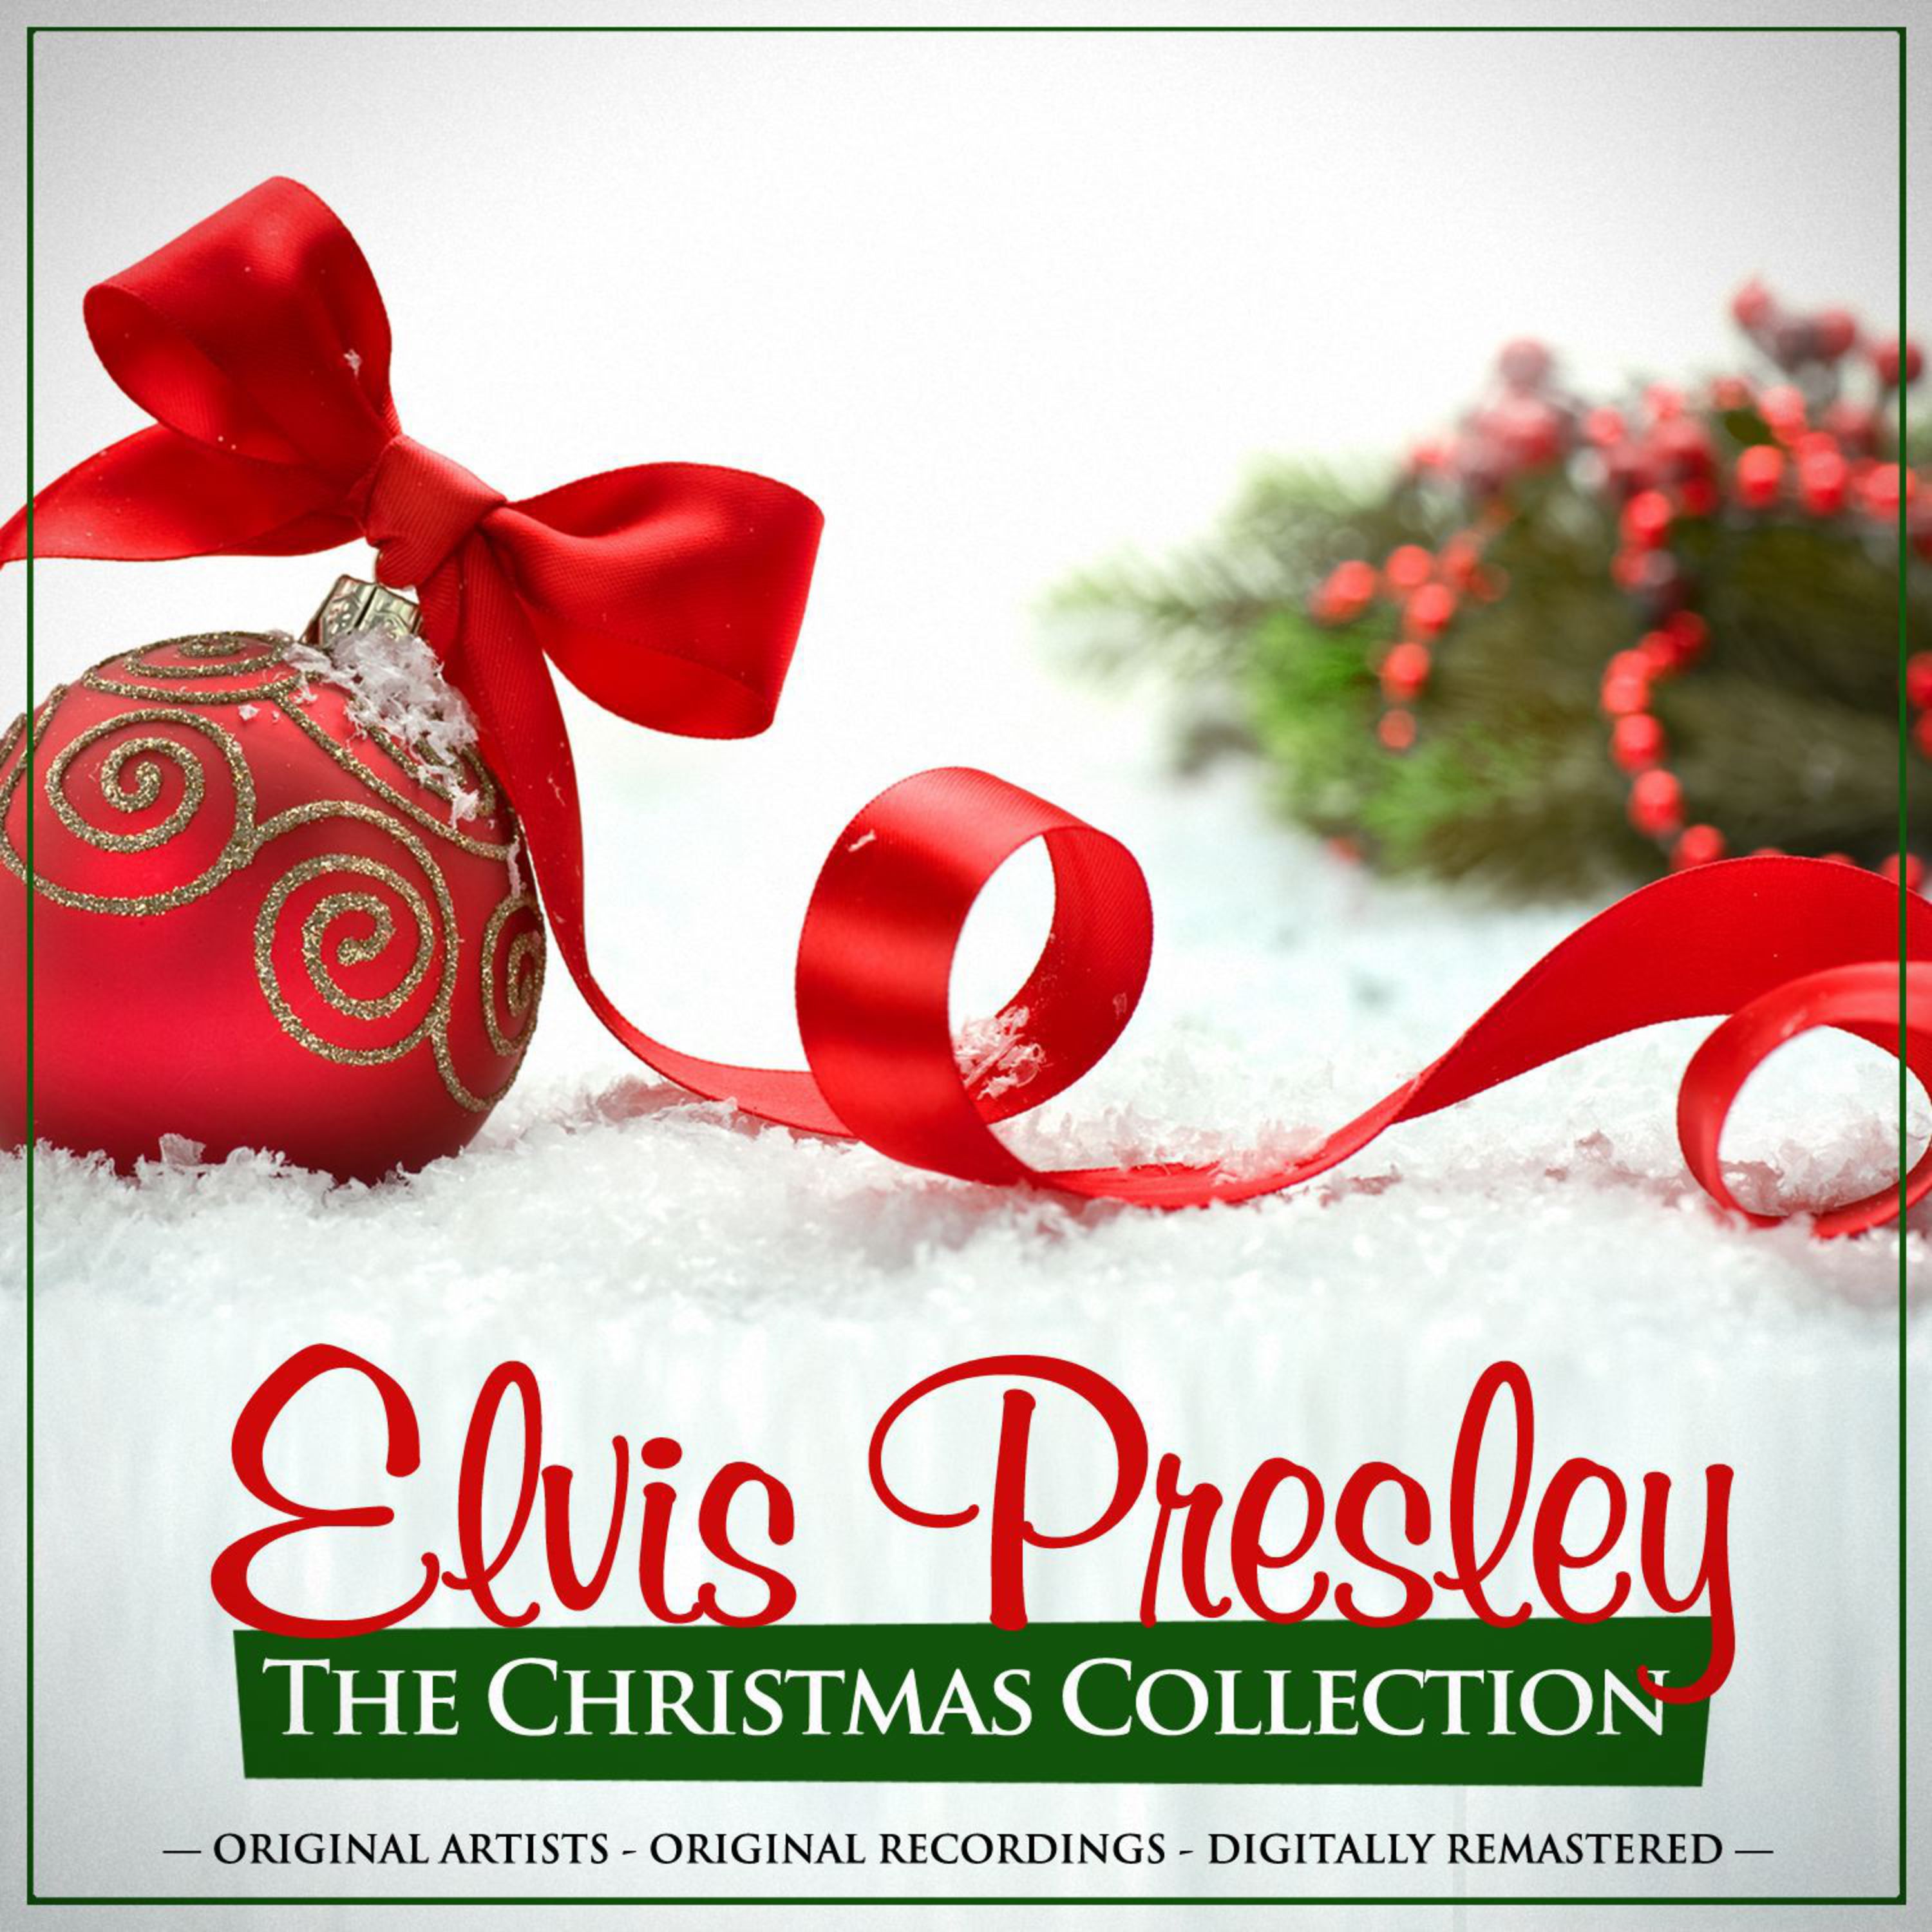 The Christmas Collection: Elvis Presley (Remastered)